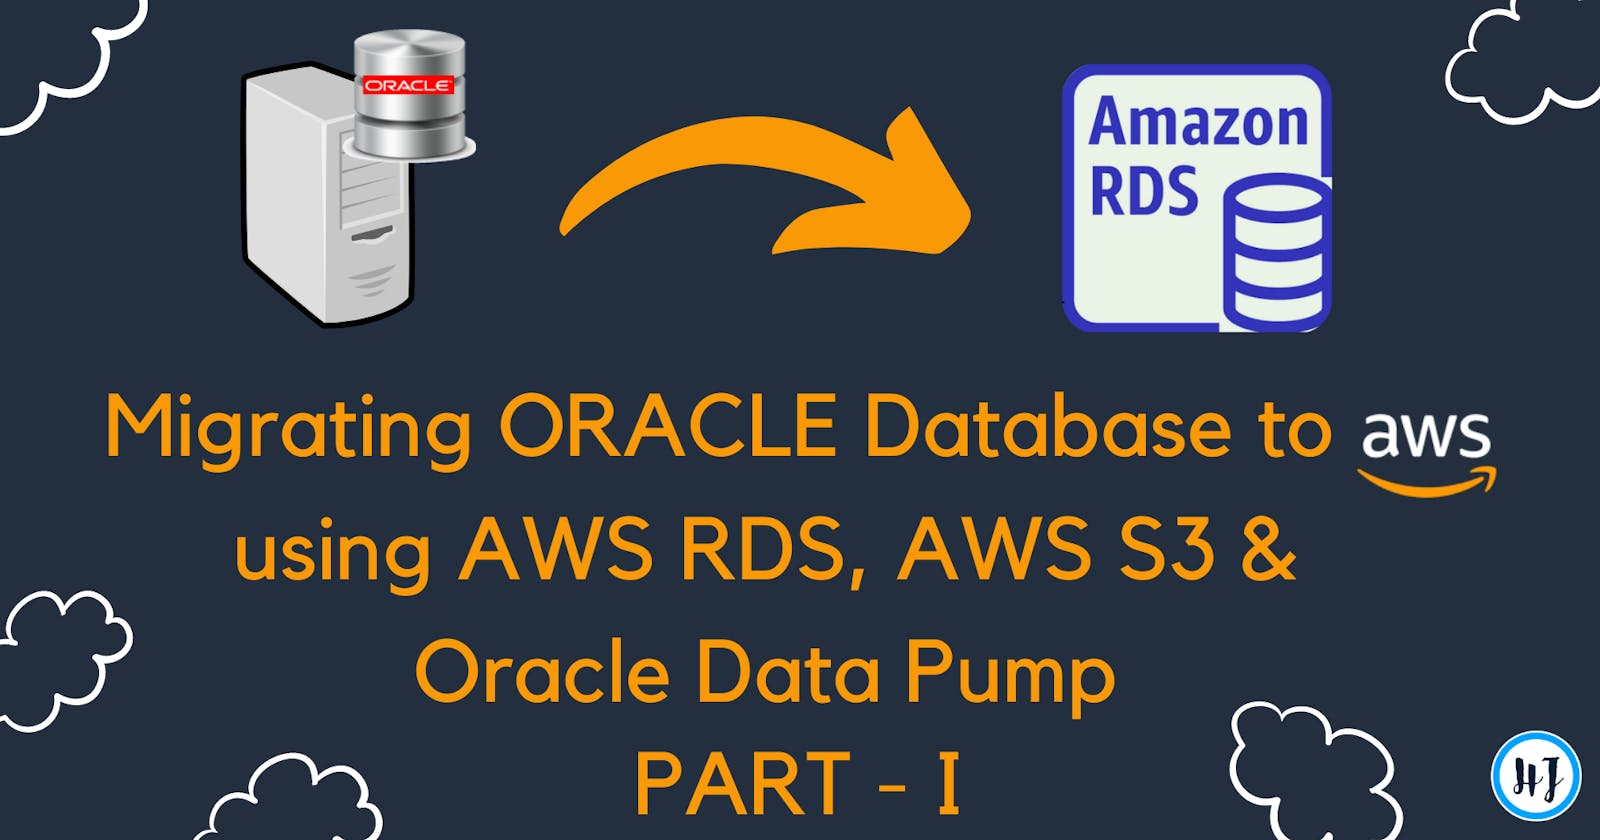 Migrating Oracle Database to AWS Cloud using AWS RDS, AWS S3 and Oracle Data Pump (PART - I)